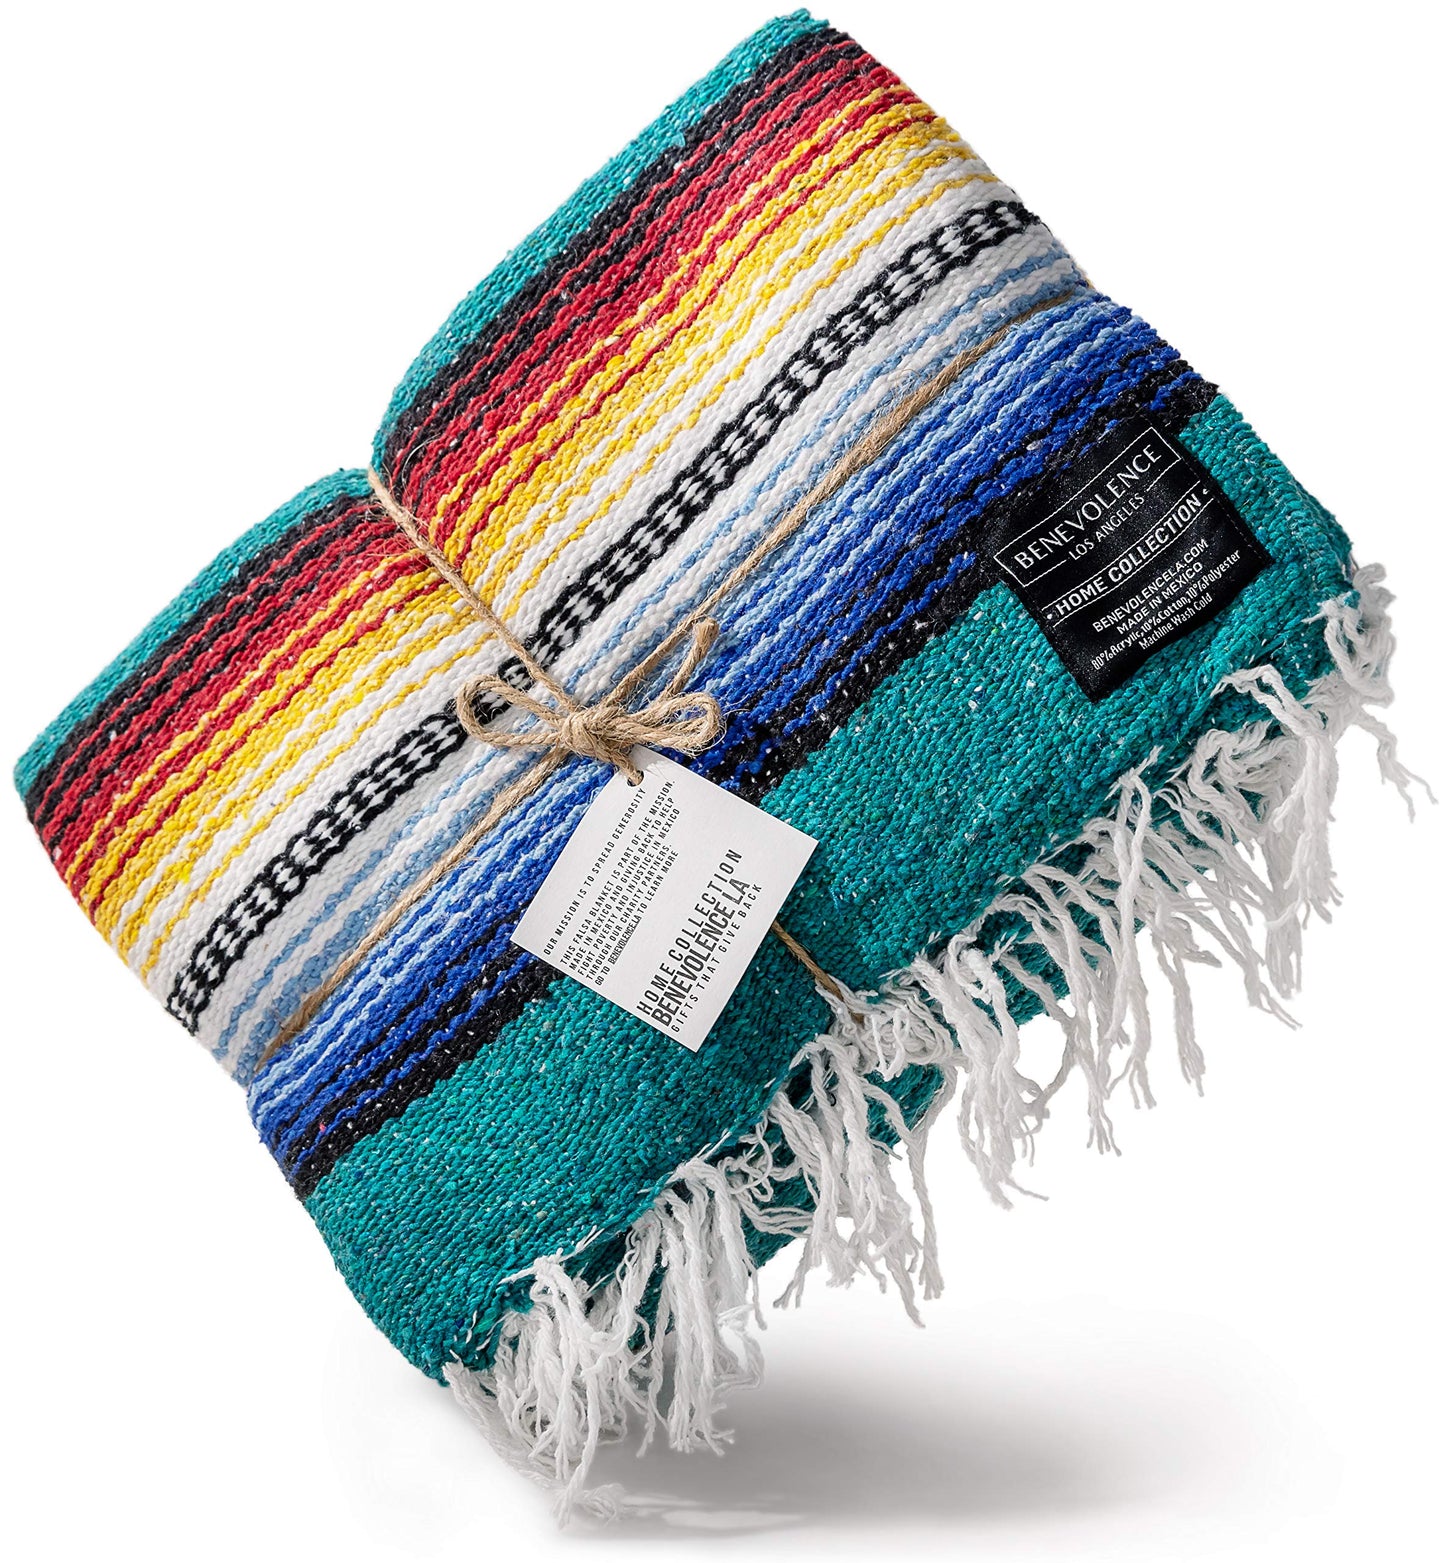 Benevolence LA Mexican Blanket, Authentic Handwoven Yoga Blanket & Outdoor Blanket, Made by Traditional Mexican Artisans, Perfect Camping Blanket, Beach Blanket, Picnic Blanket, & Car Blanket (Agua)